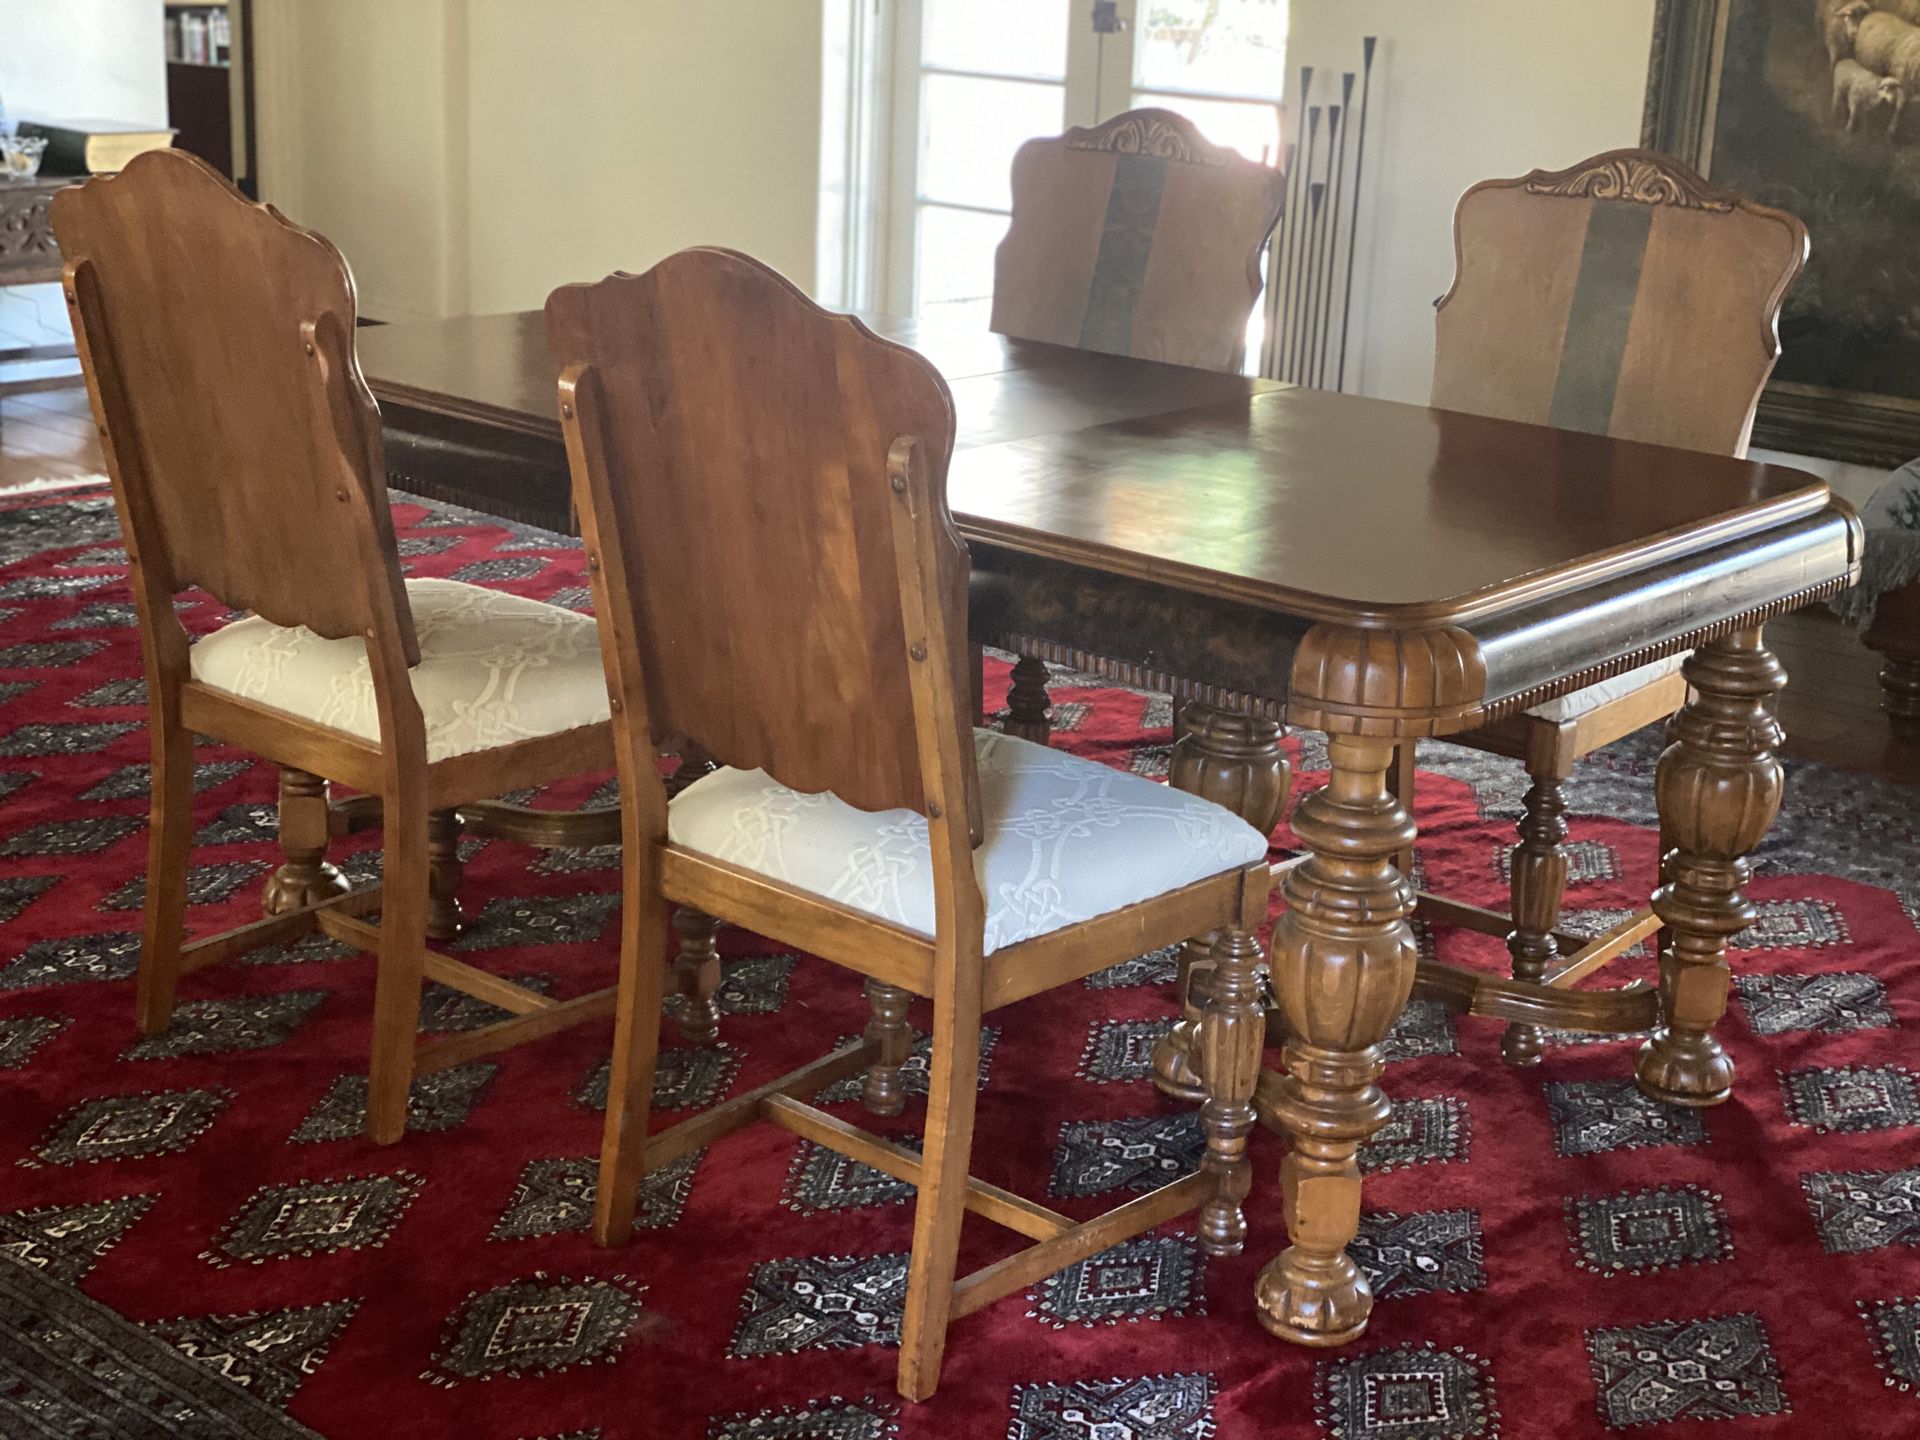 1920s Victorian Style, Walnut Dining Room Table & Chairs (5 Piece Set)